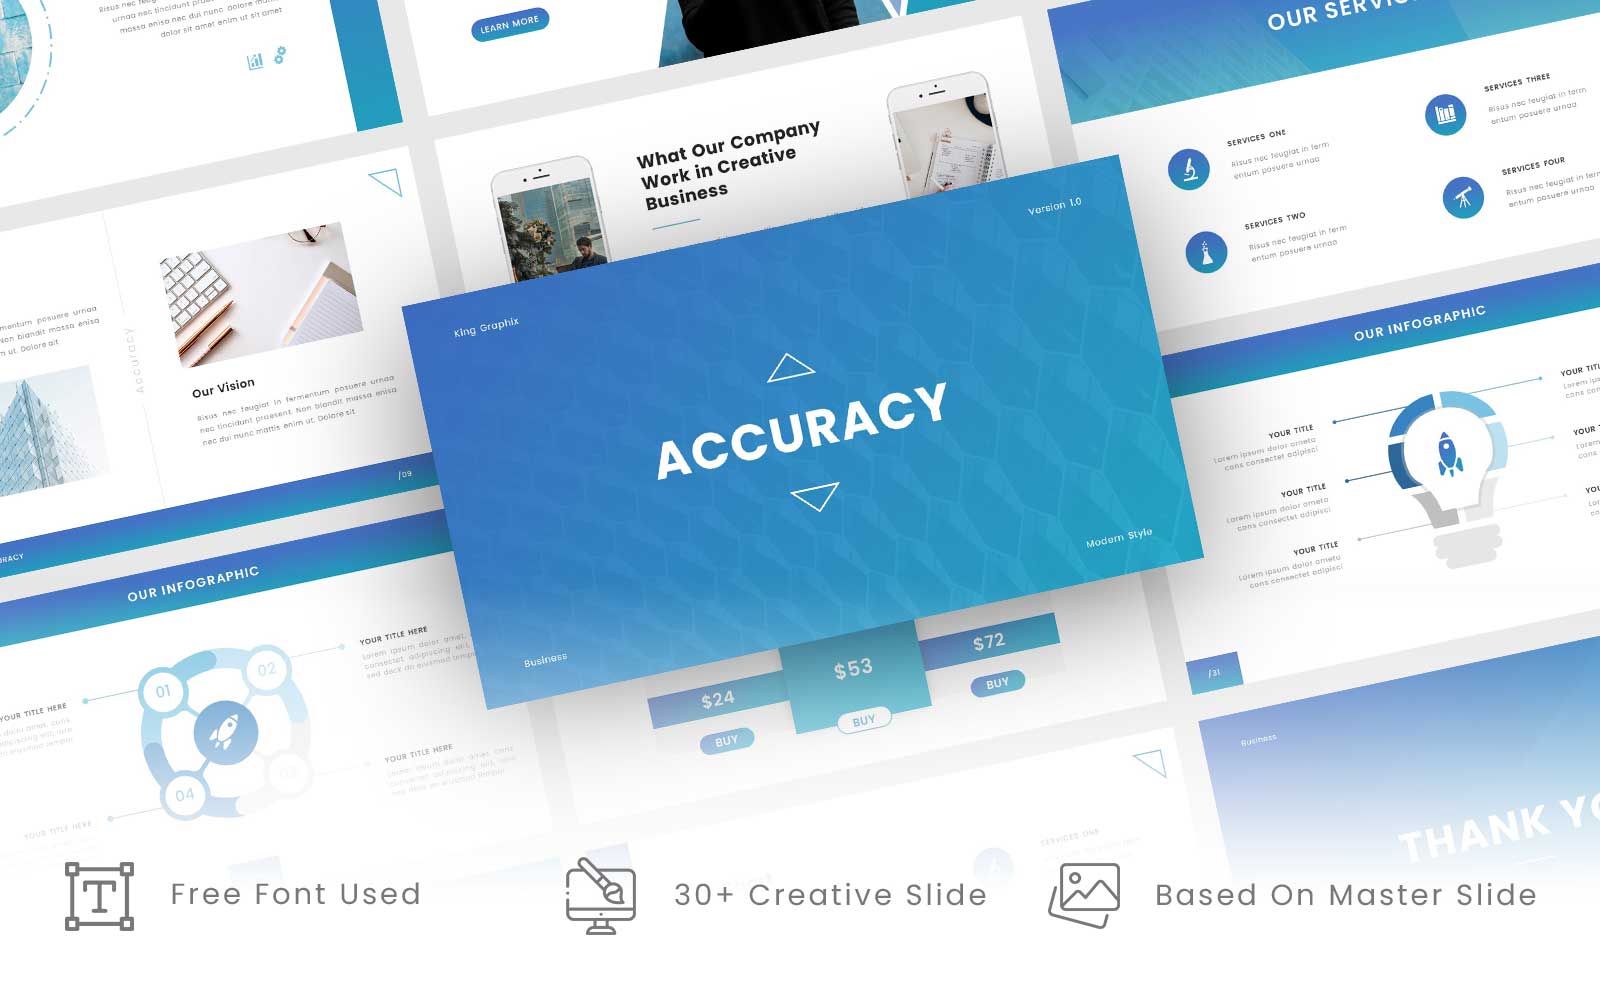 Accuracy - Multipurpose Business PowerPoint Template